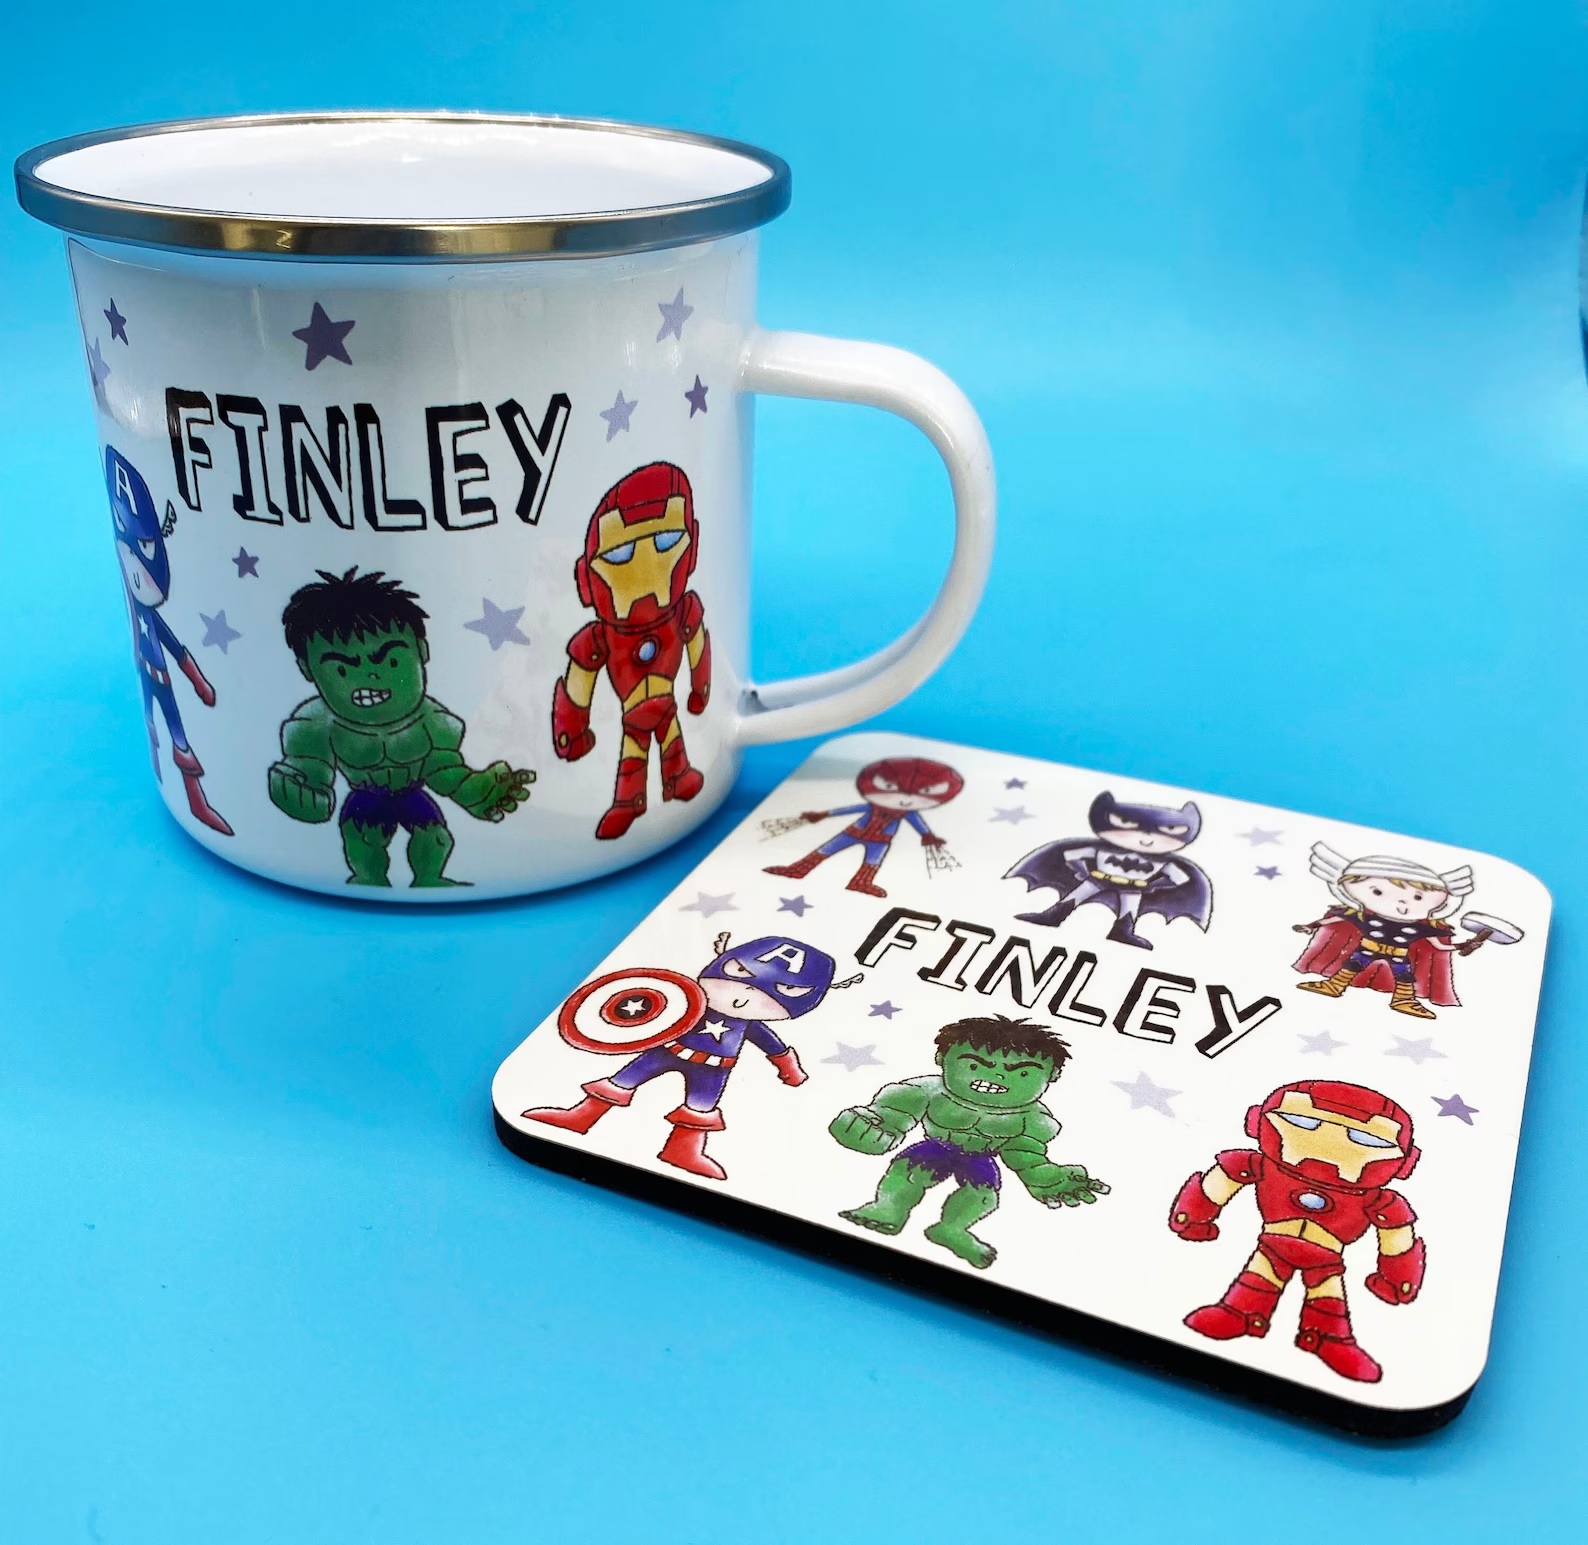 A white, child-sized mug with cartoonish drawings of the Avengers and the personalized name "Finley" in thin block letters. There is also a matching, square coaster